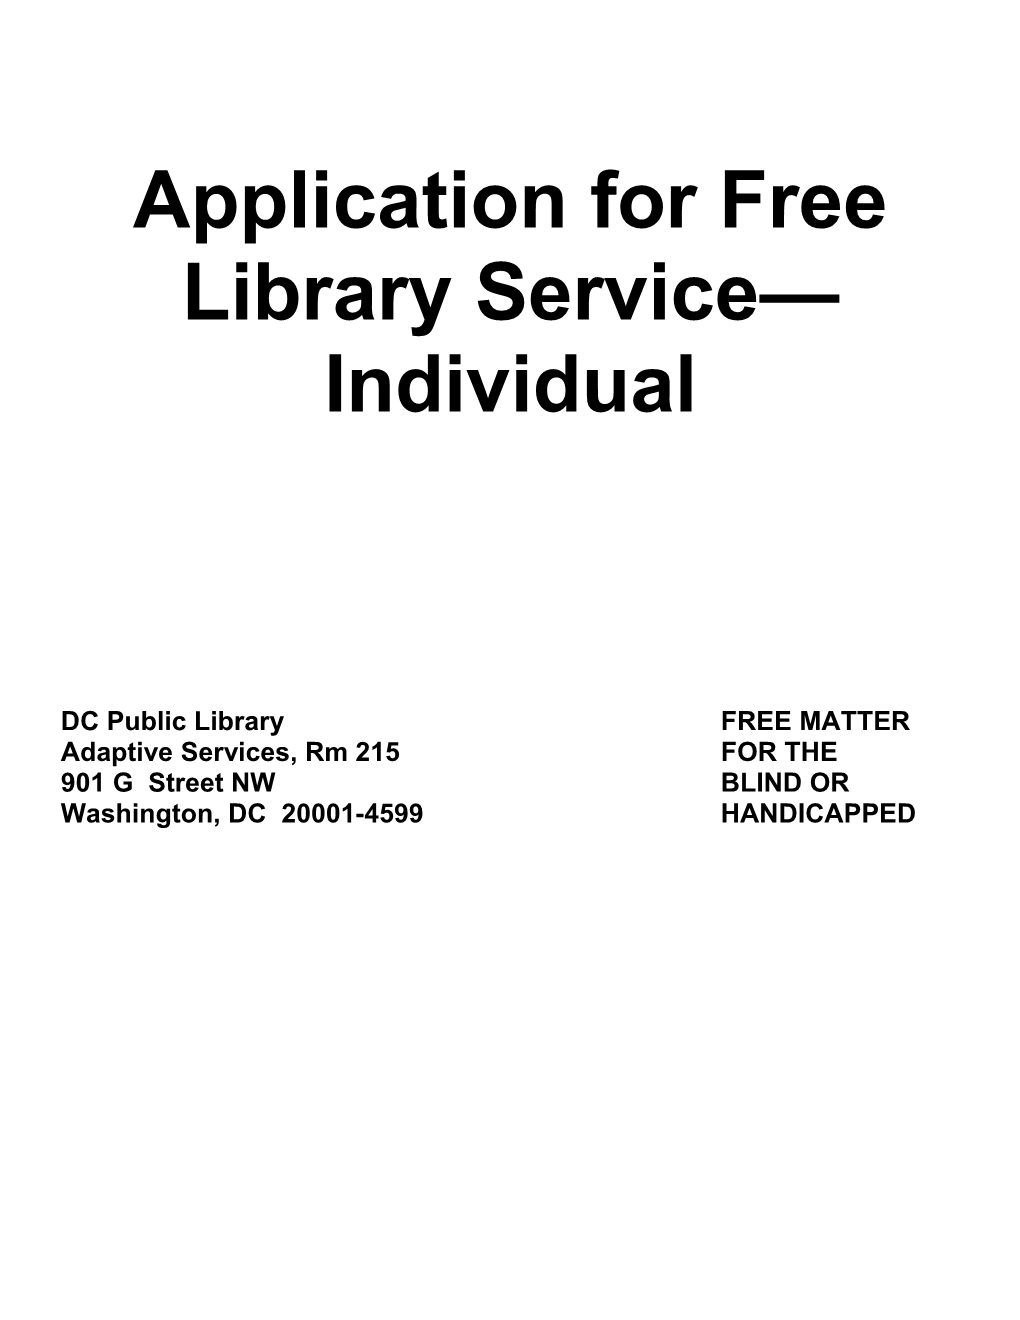 Application for Free Talking Book and Braille Service